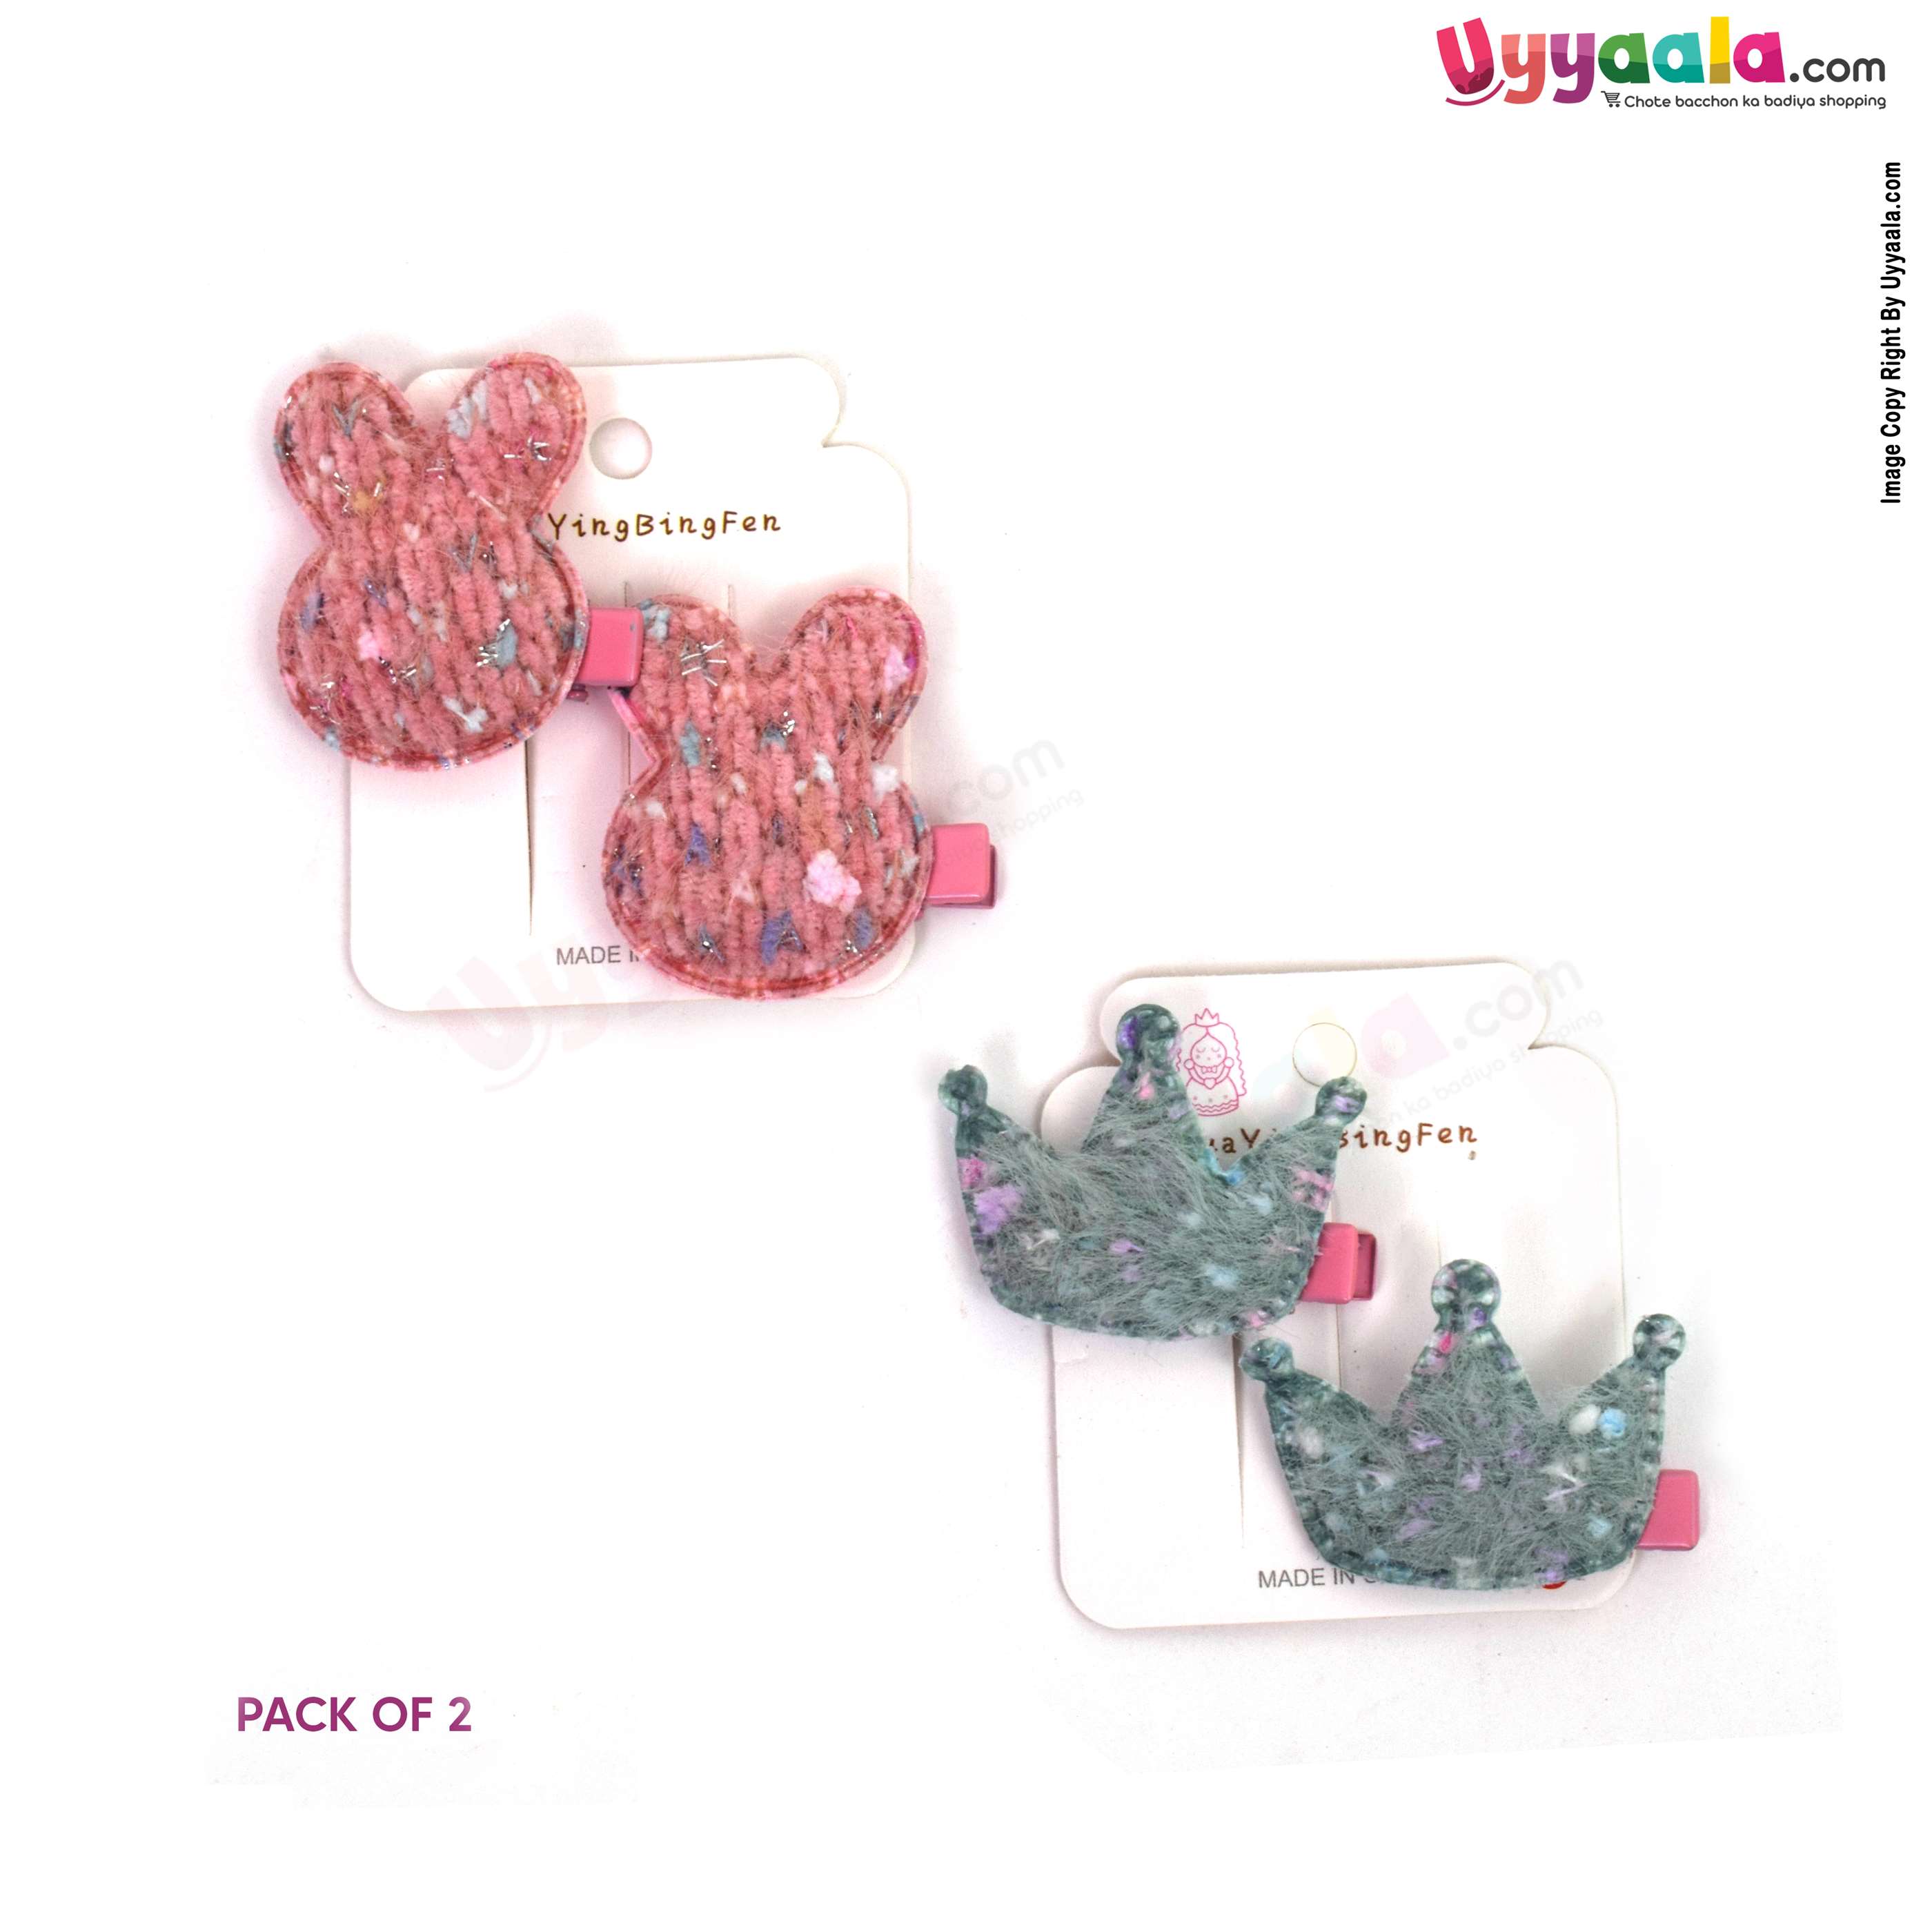 Crown & bunny hair clip set for babies & girls, Pack of 2 - green & pink, 6 + months